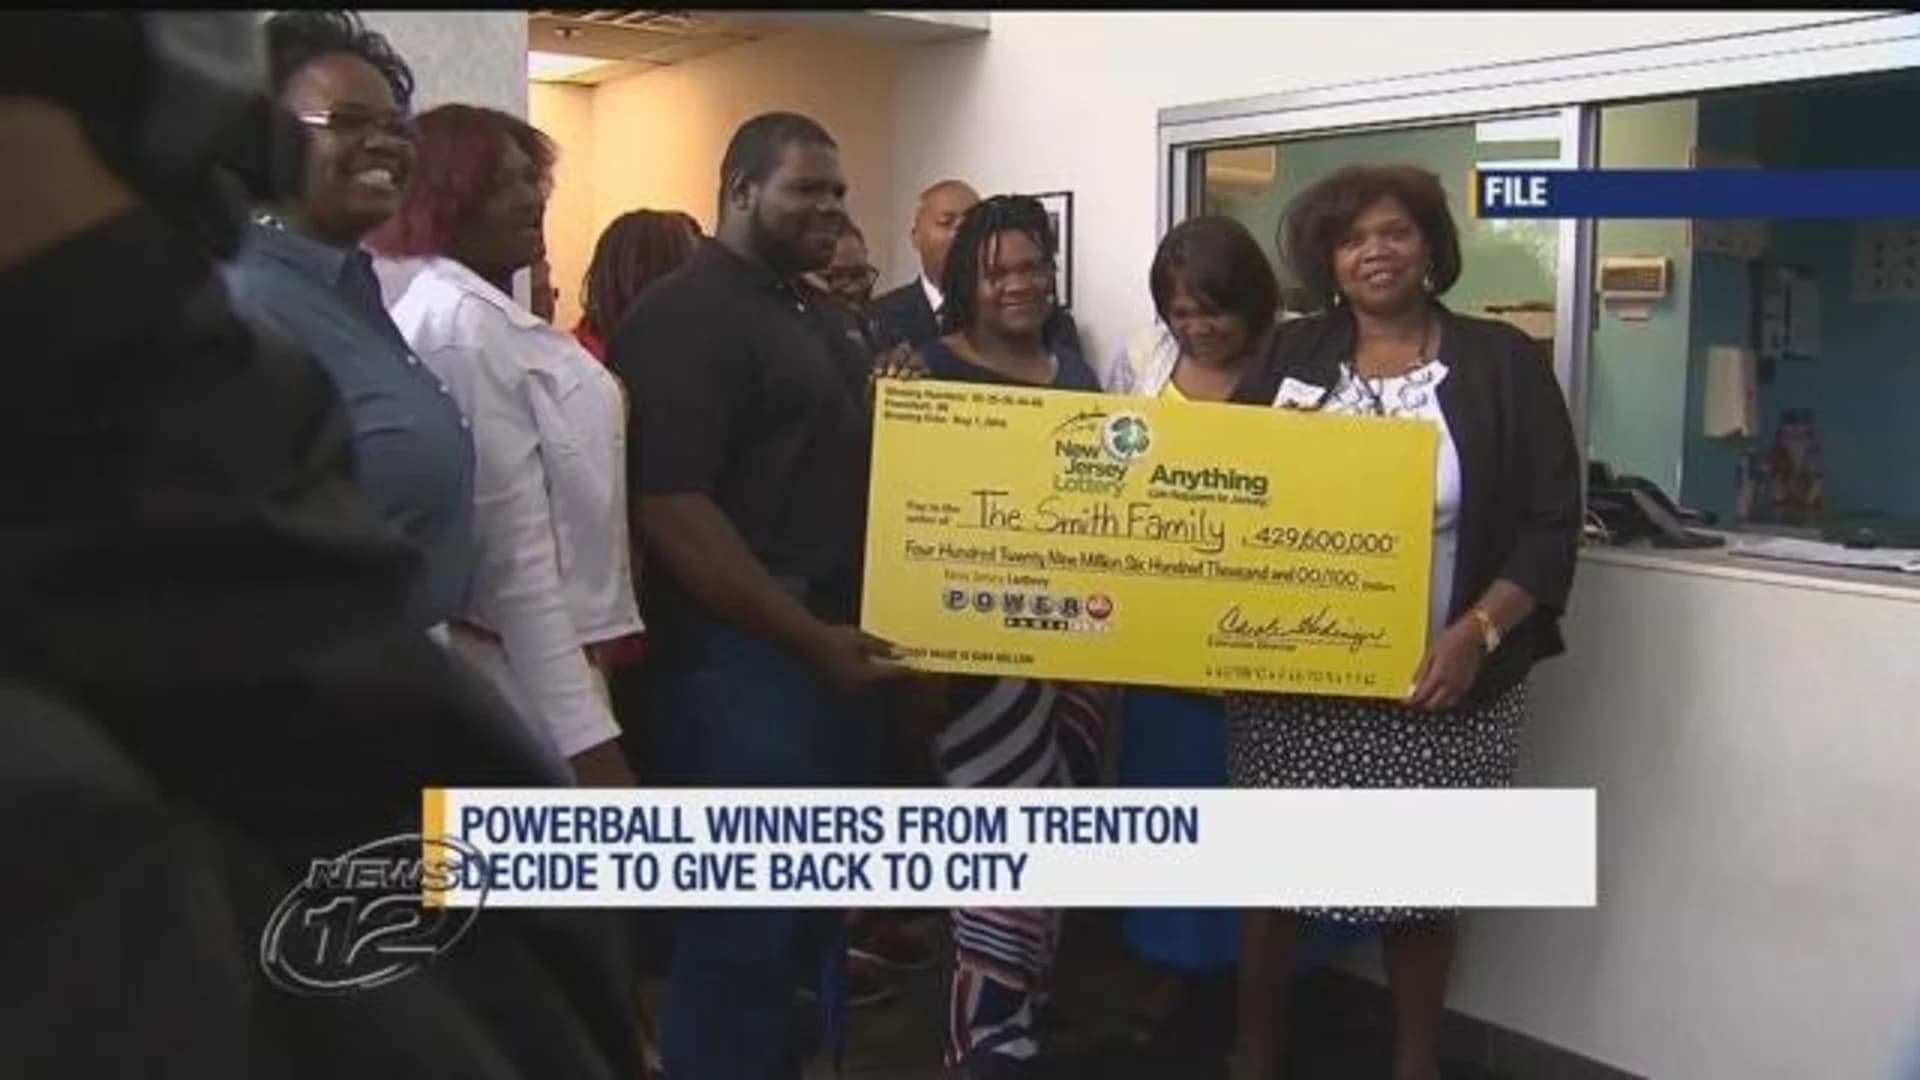 New Jersey Powerball winners use jackpot to help others